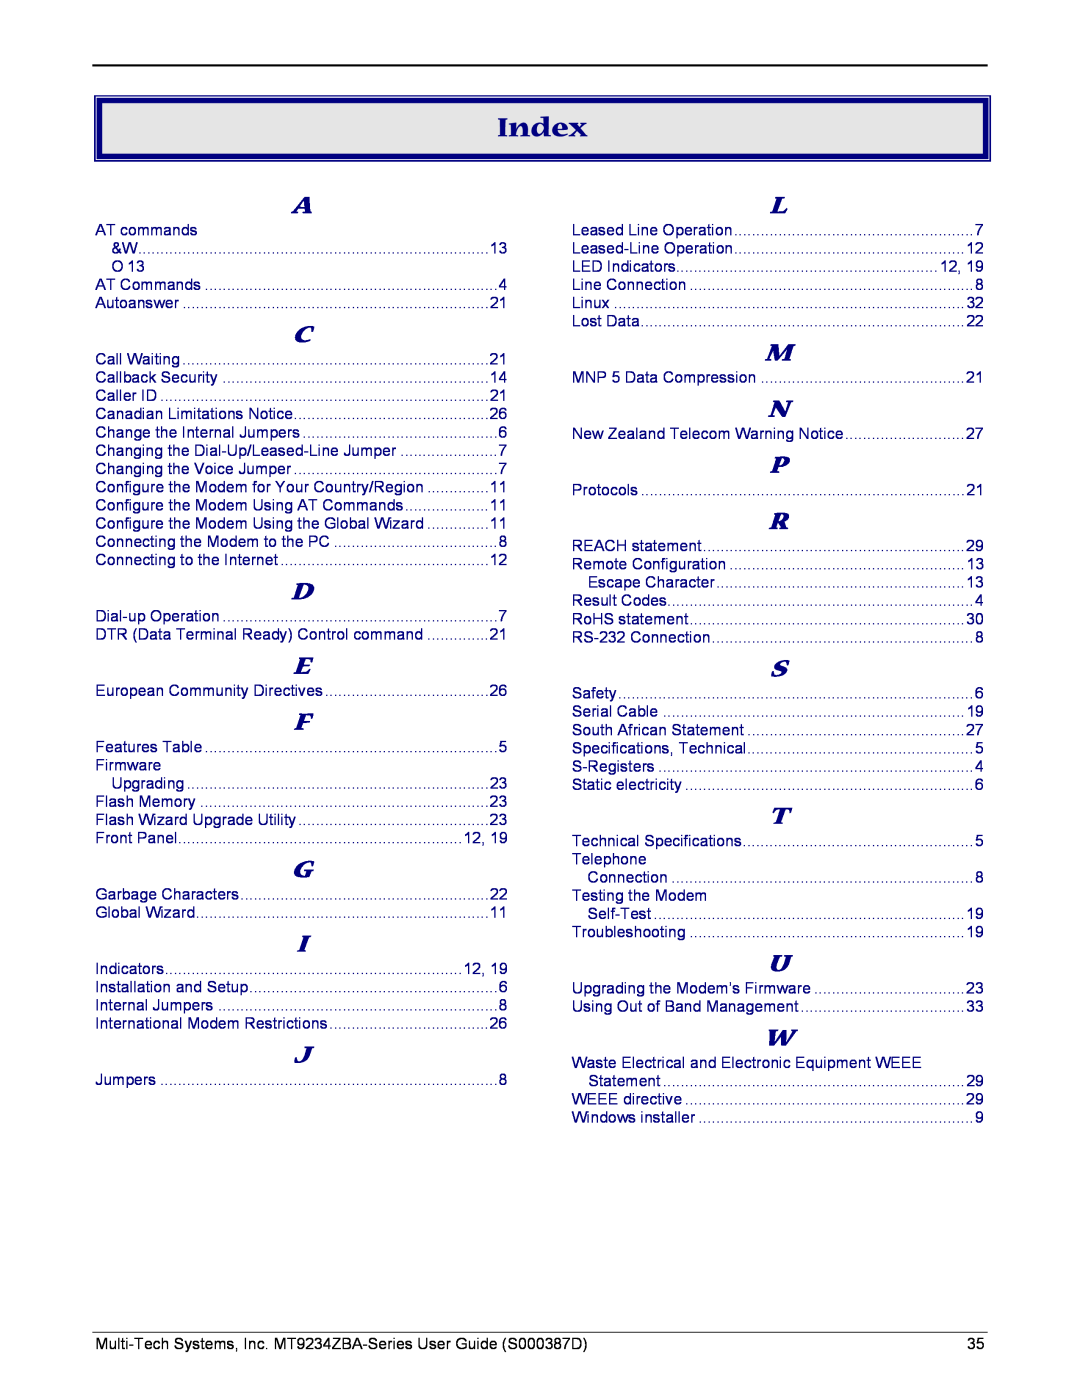 Multi-Tech Systems MT9234ZBA manual Index 